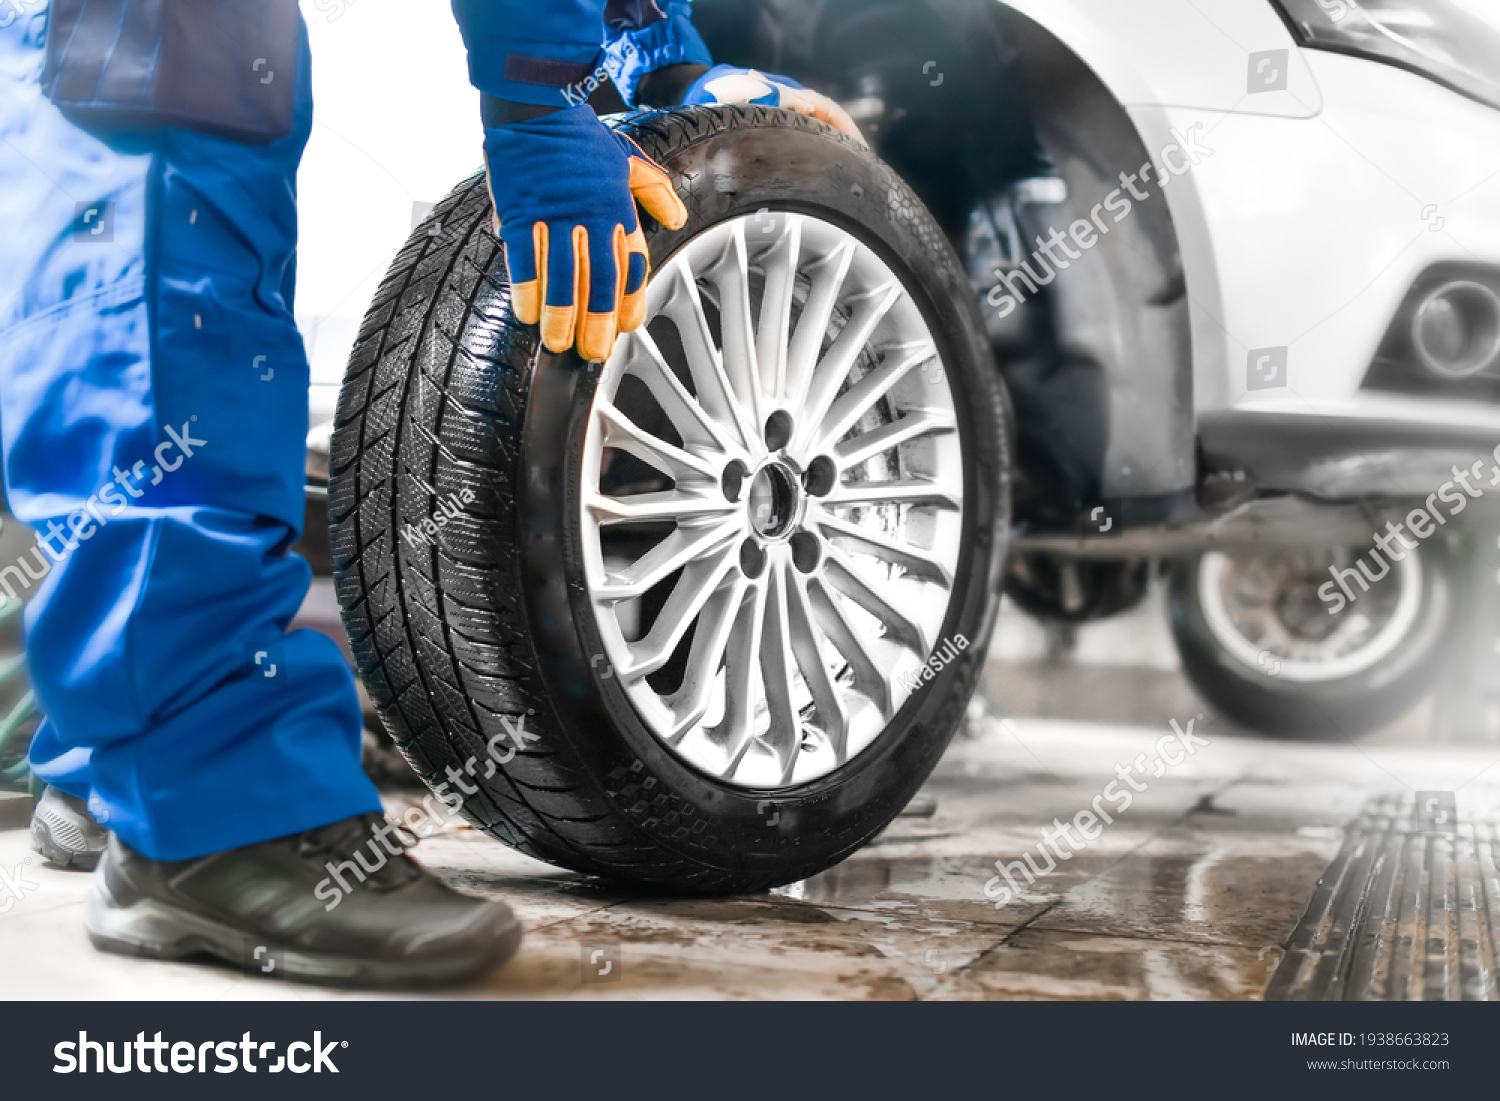 stock-photo-car-mechanic-working-in-garage-and-changing-wheel-alloy-tire-repair-or-maintenance-auto-service-1938663823.jpg